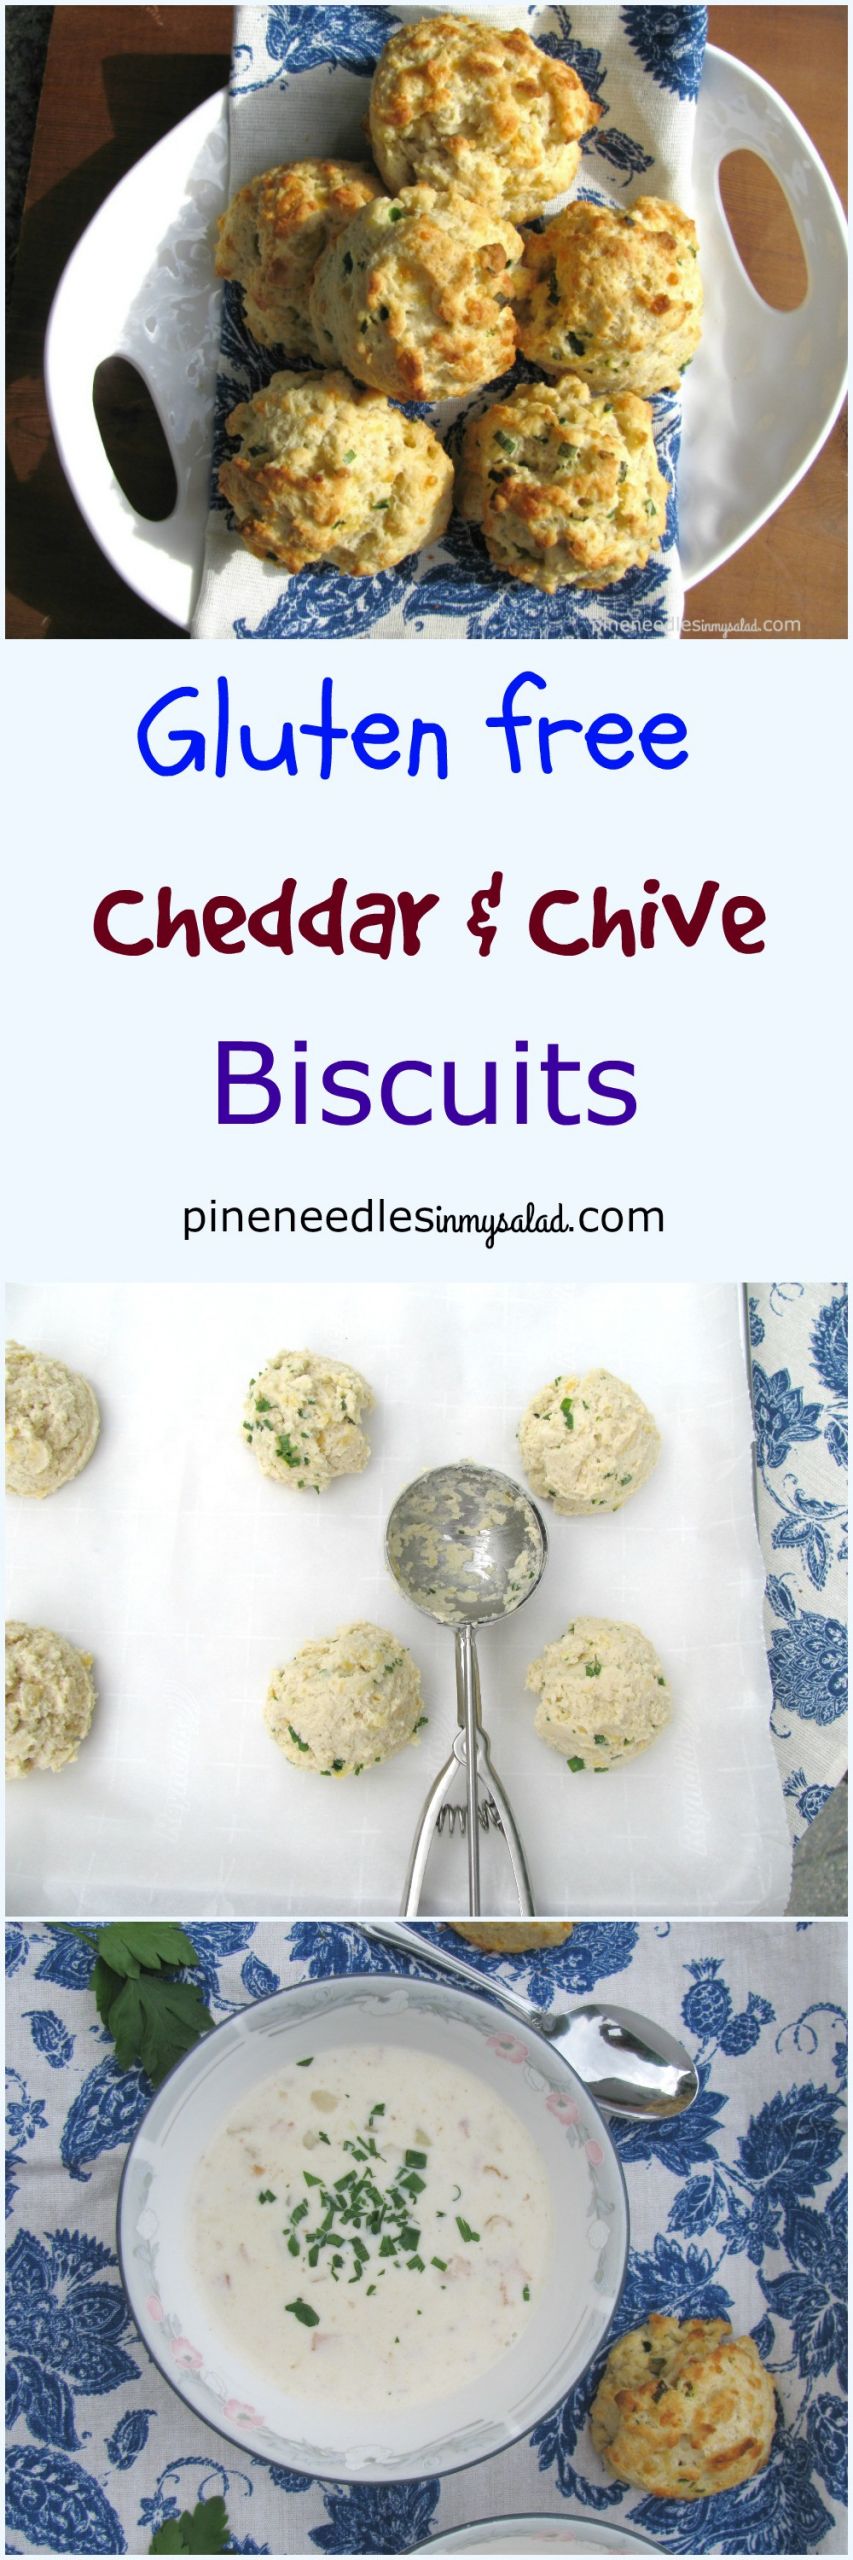 Pillsbury Gluten Free Flour Recipes
 An easy gluten free cheddar and chive biscuits recipe